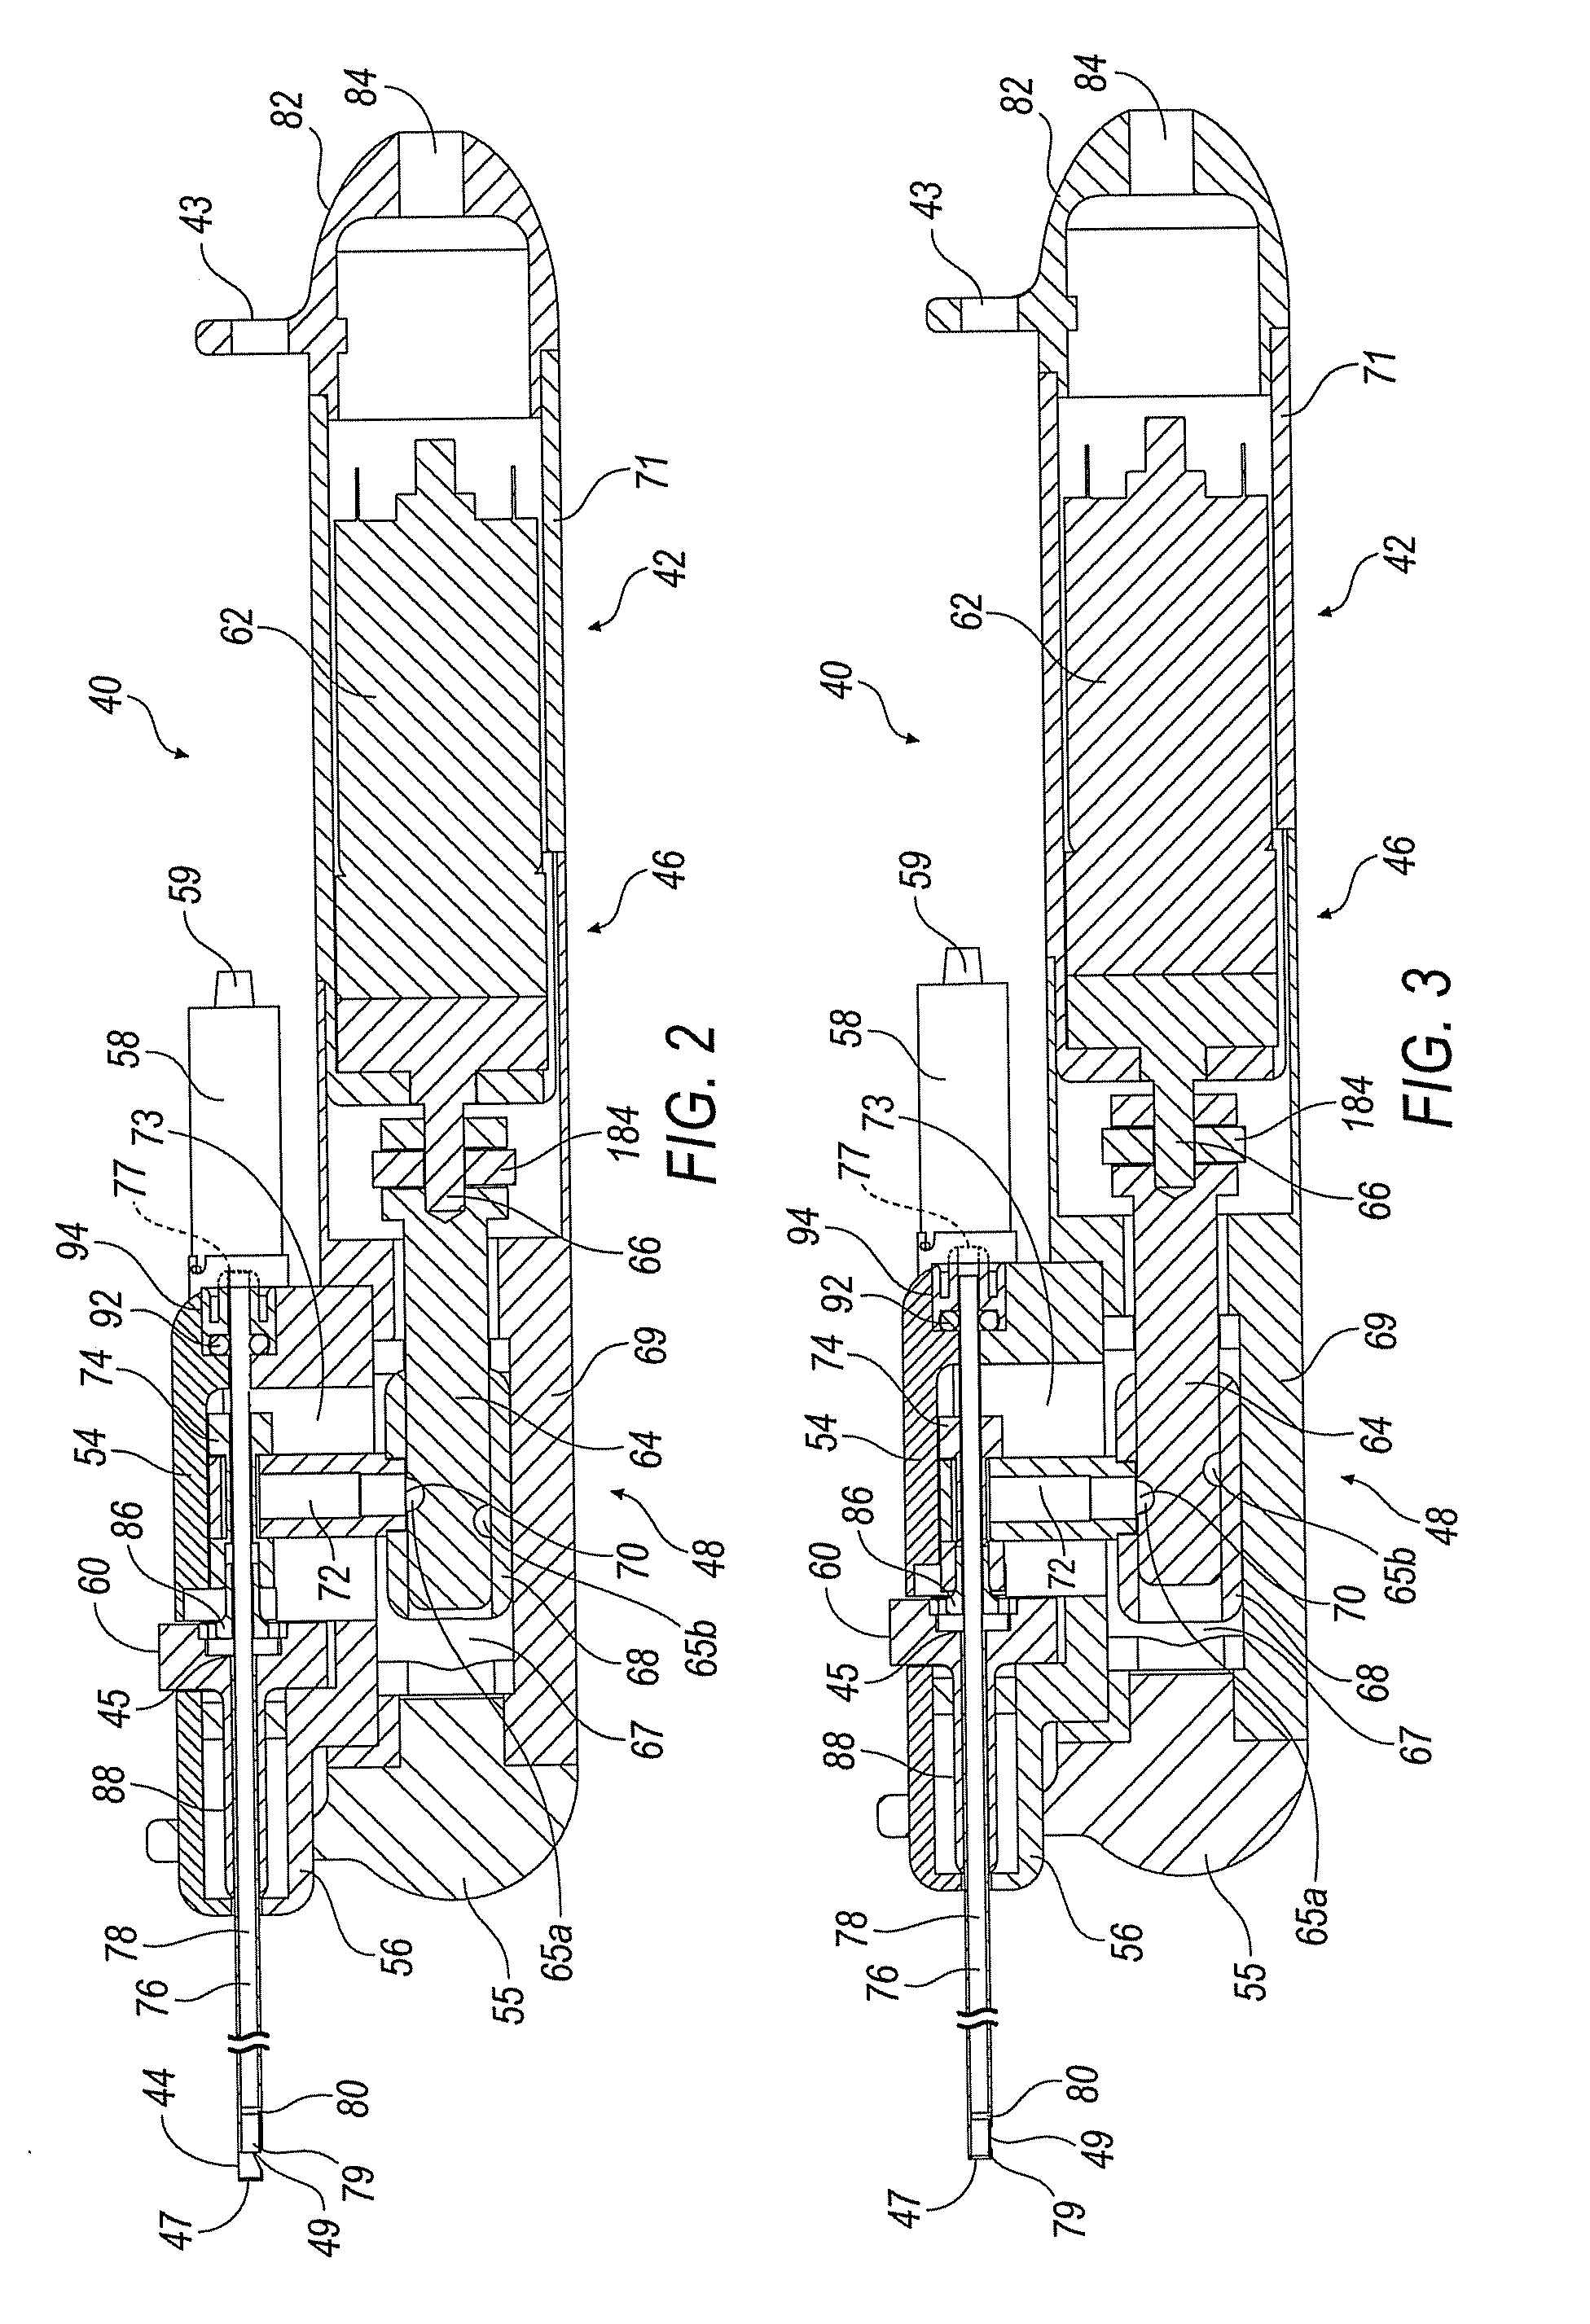 Positioning system for tissue removal device